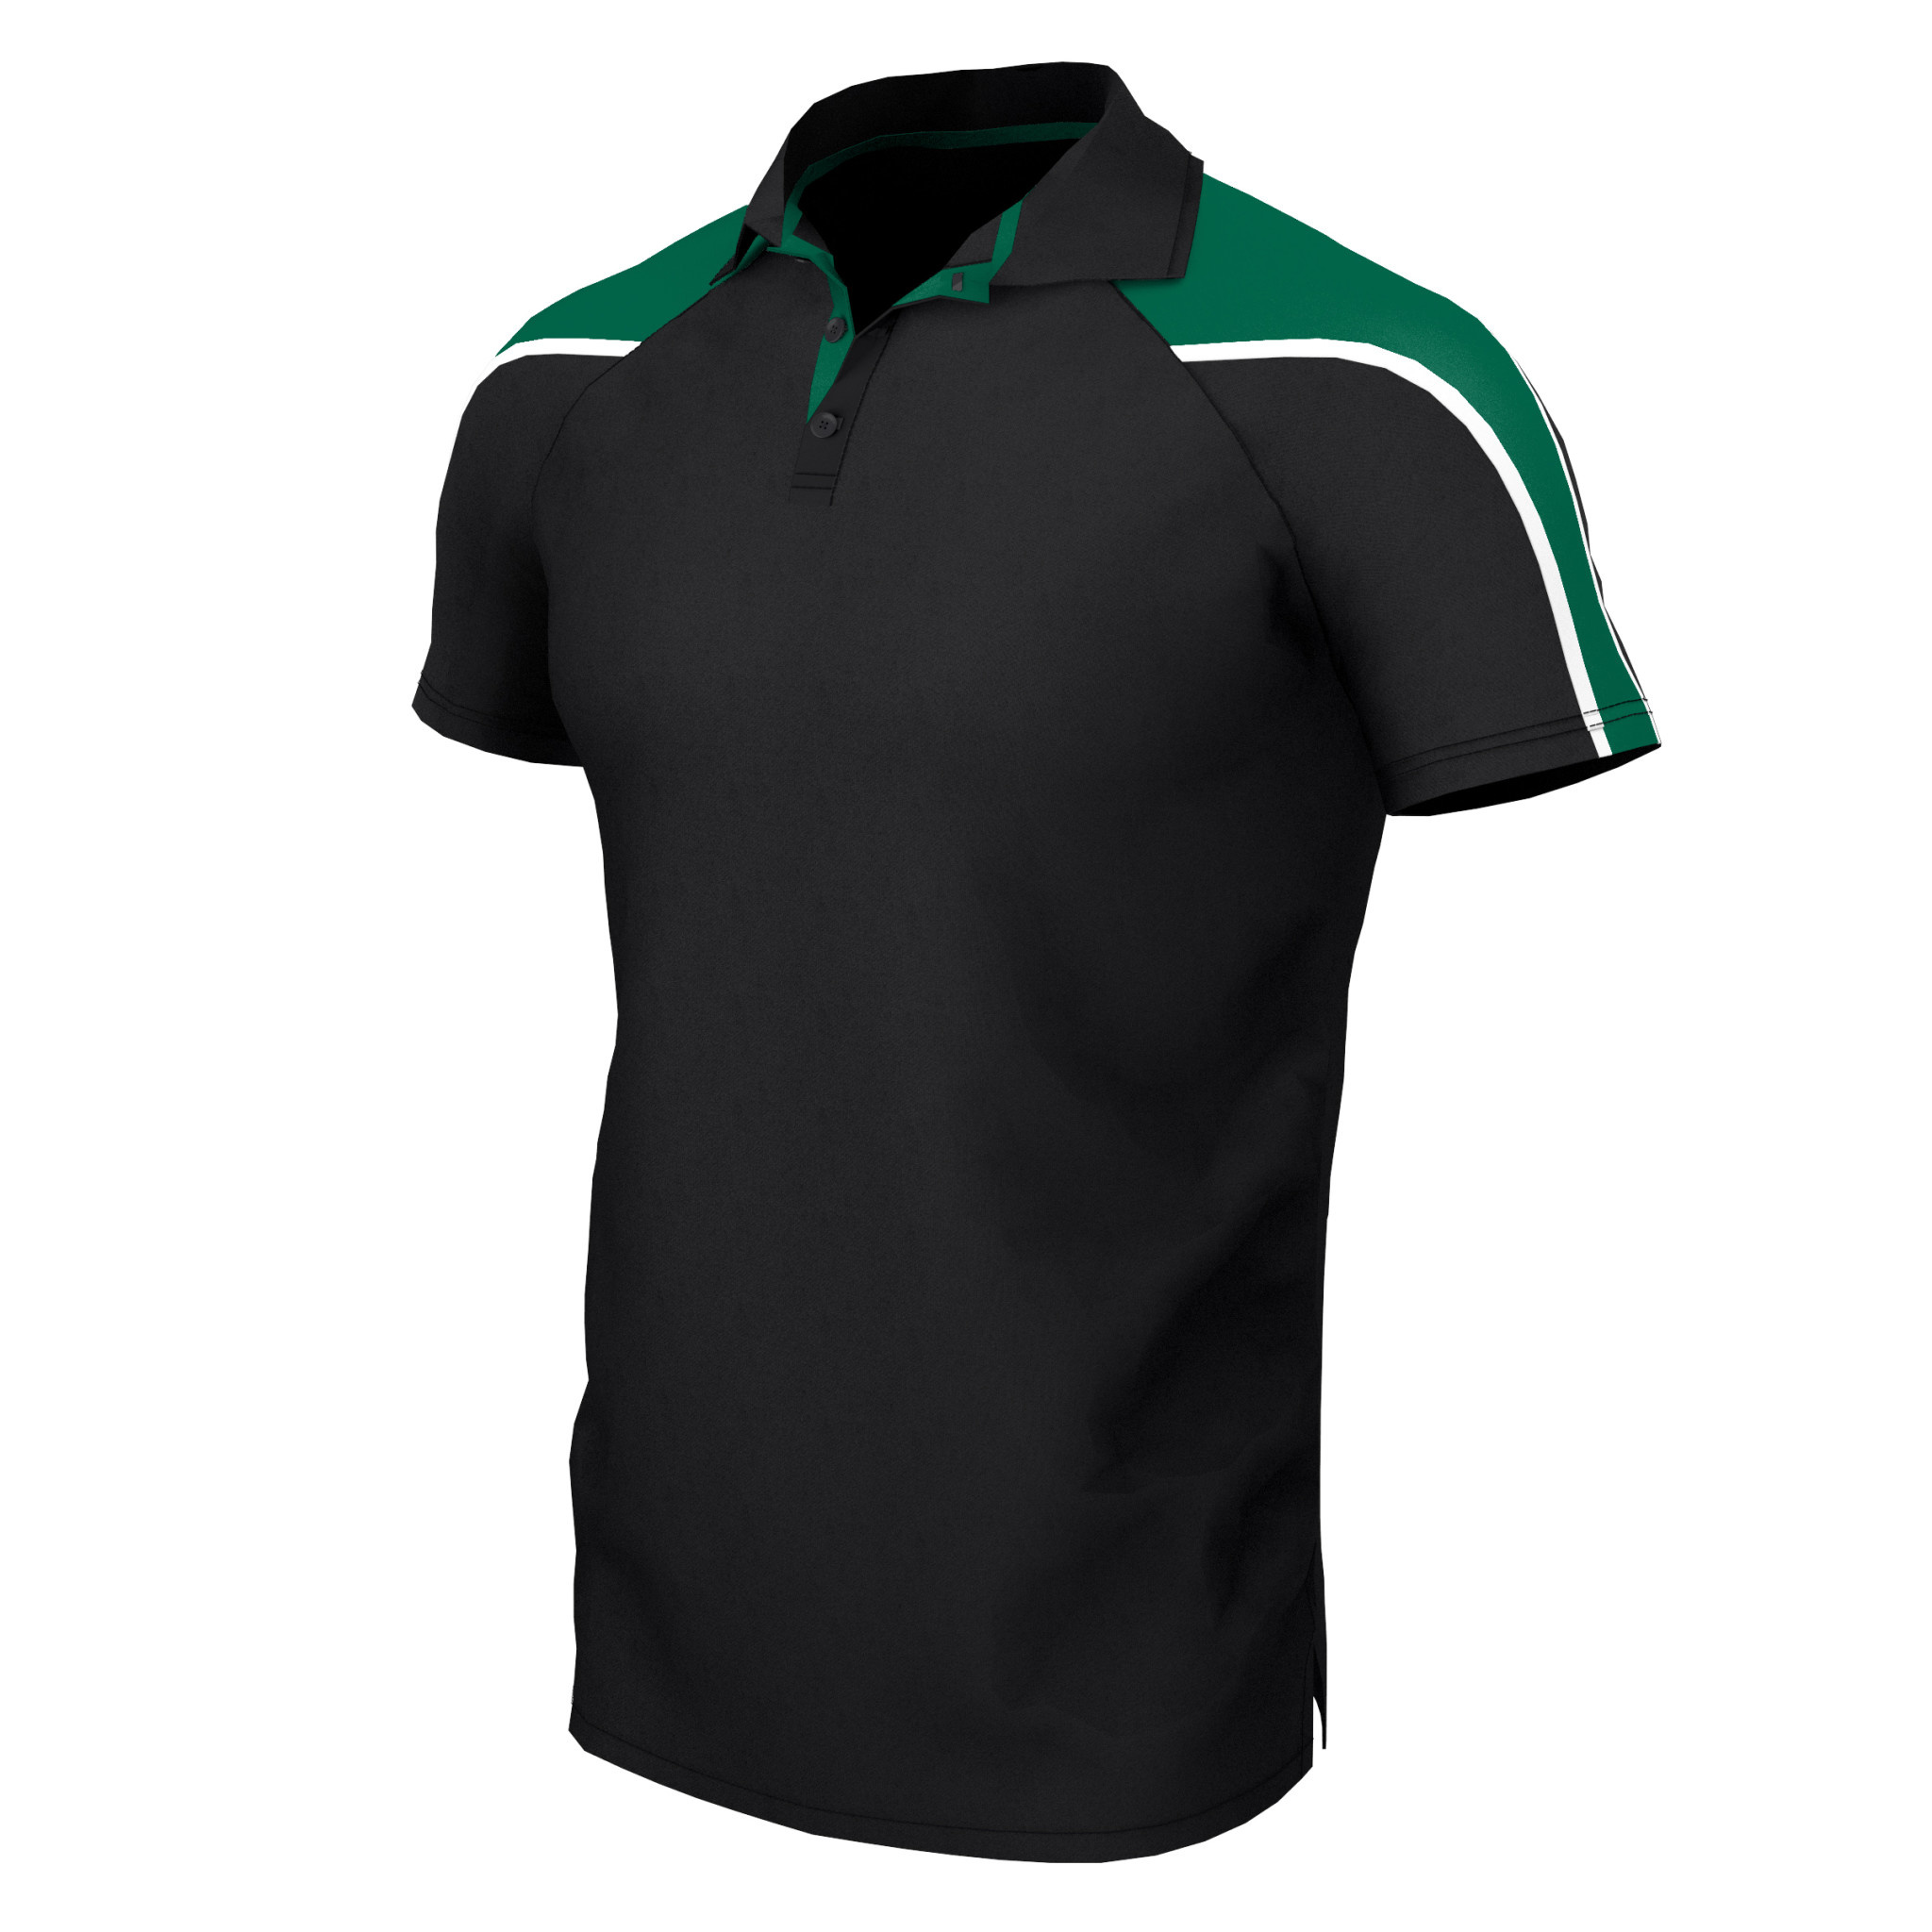 Youths iGen Polo Shirt